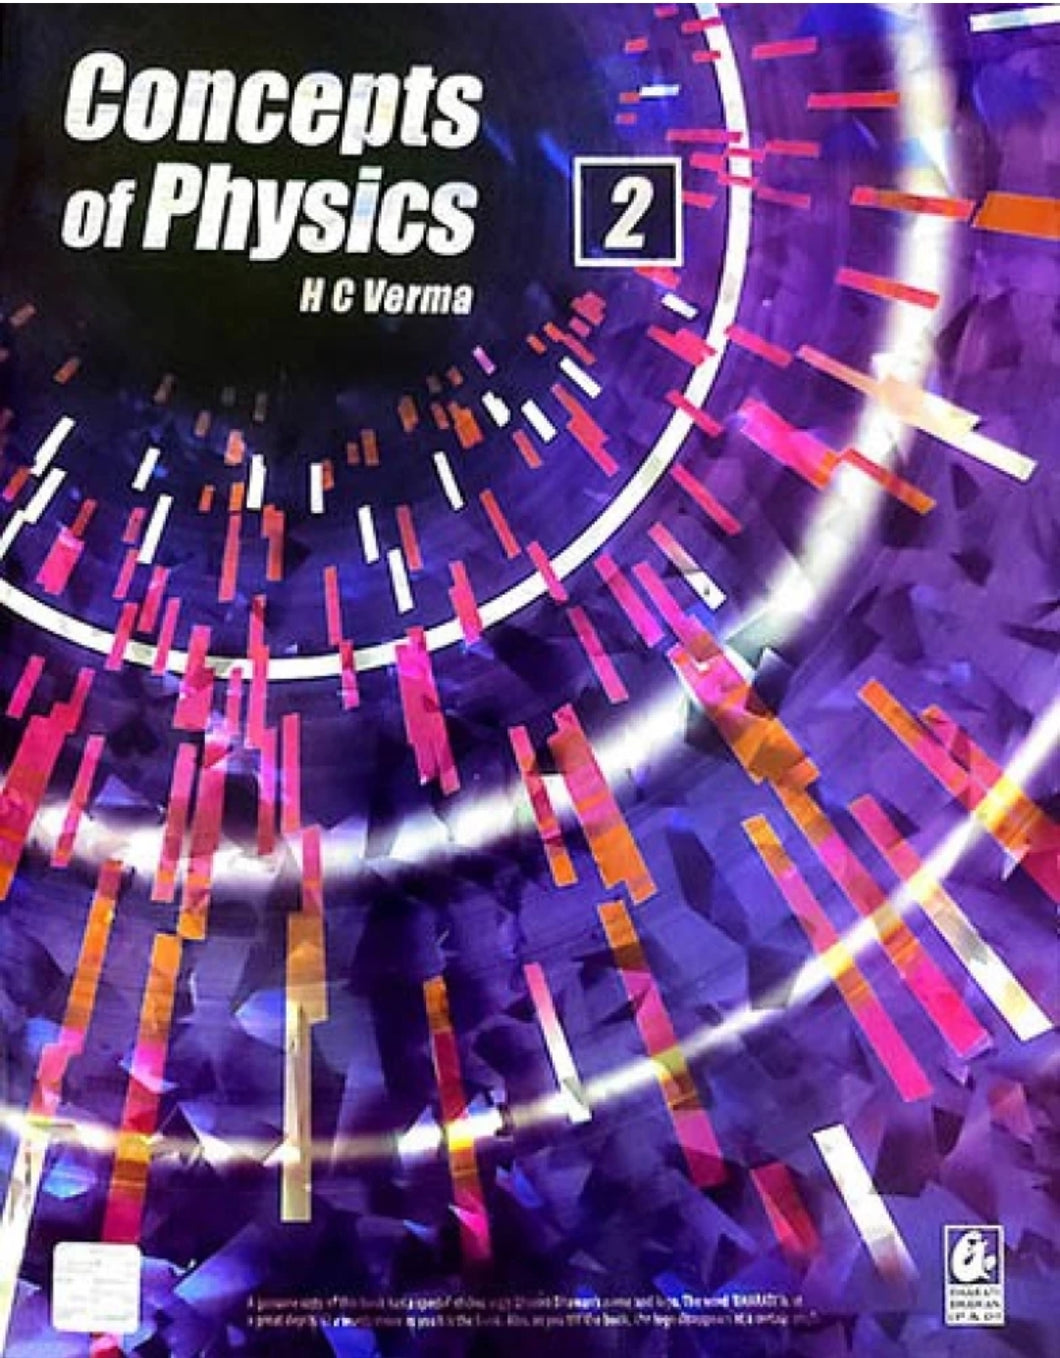 Concept of Physics Part-2 by H.C Verma